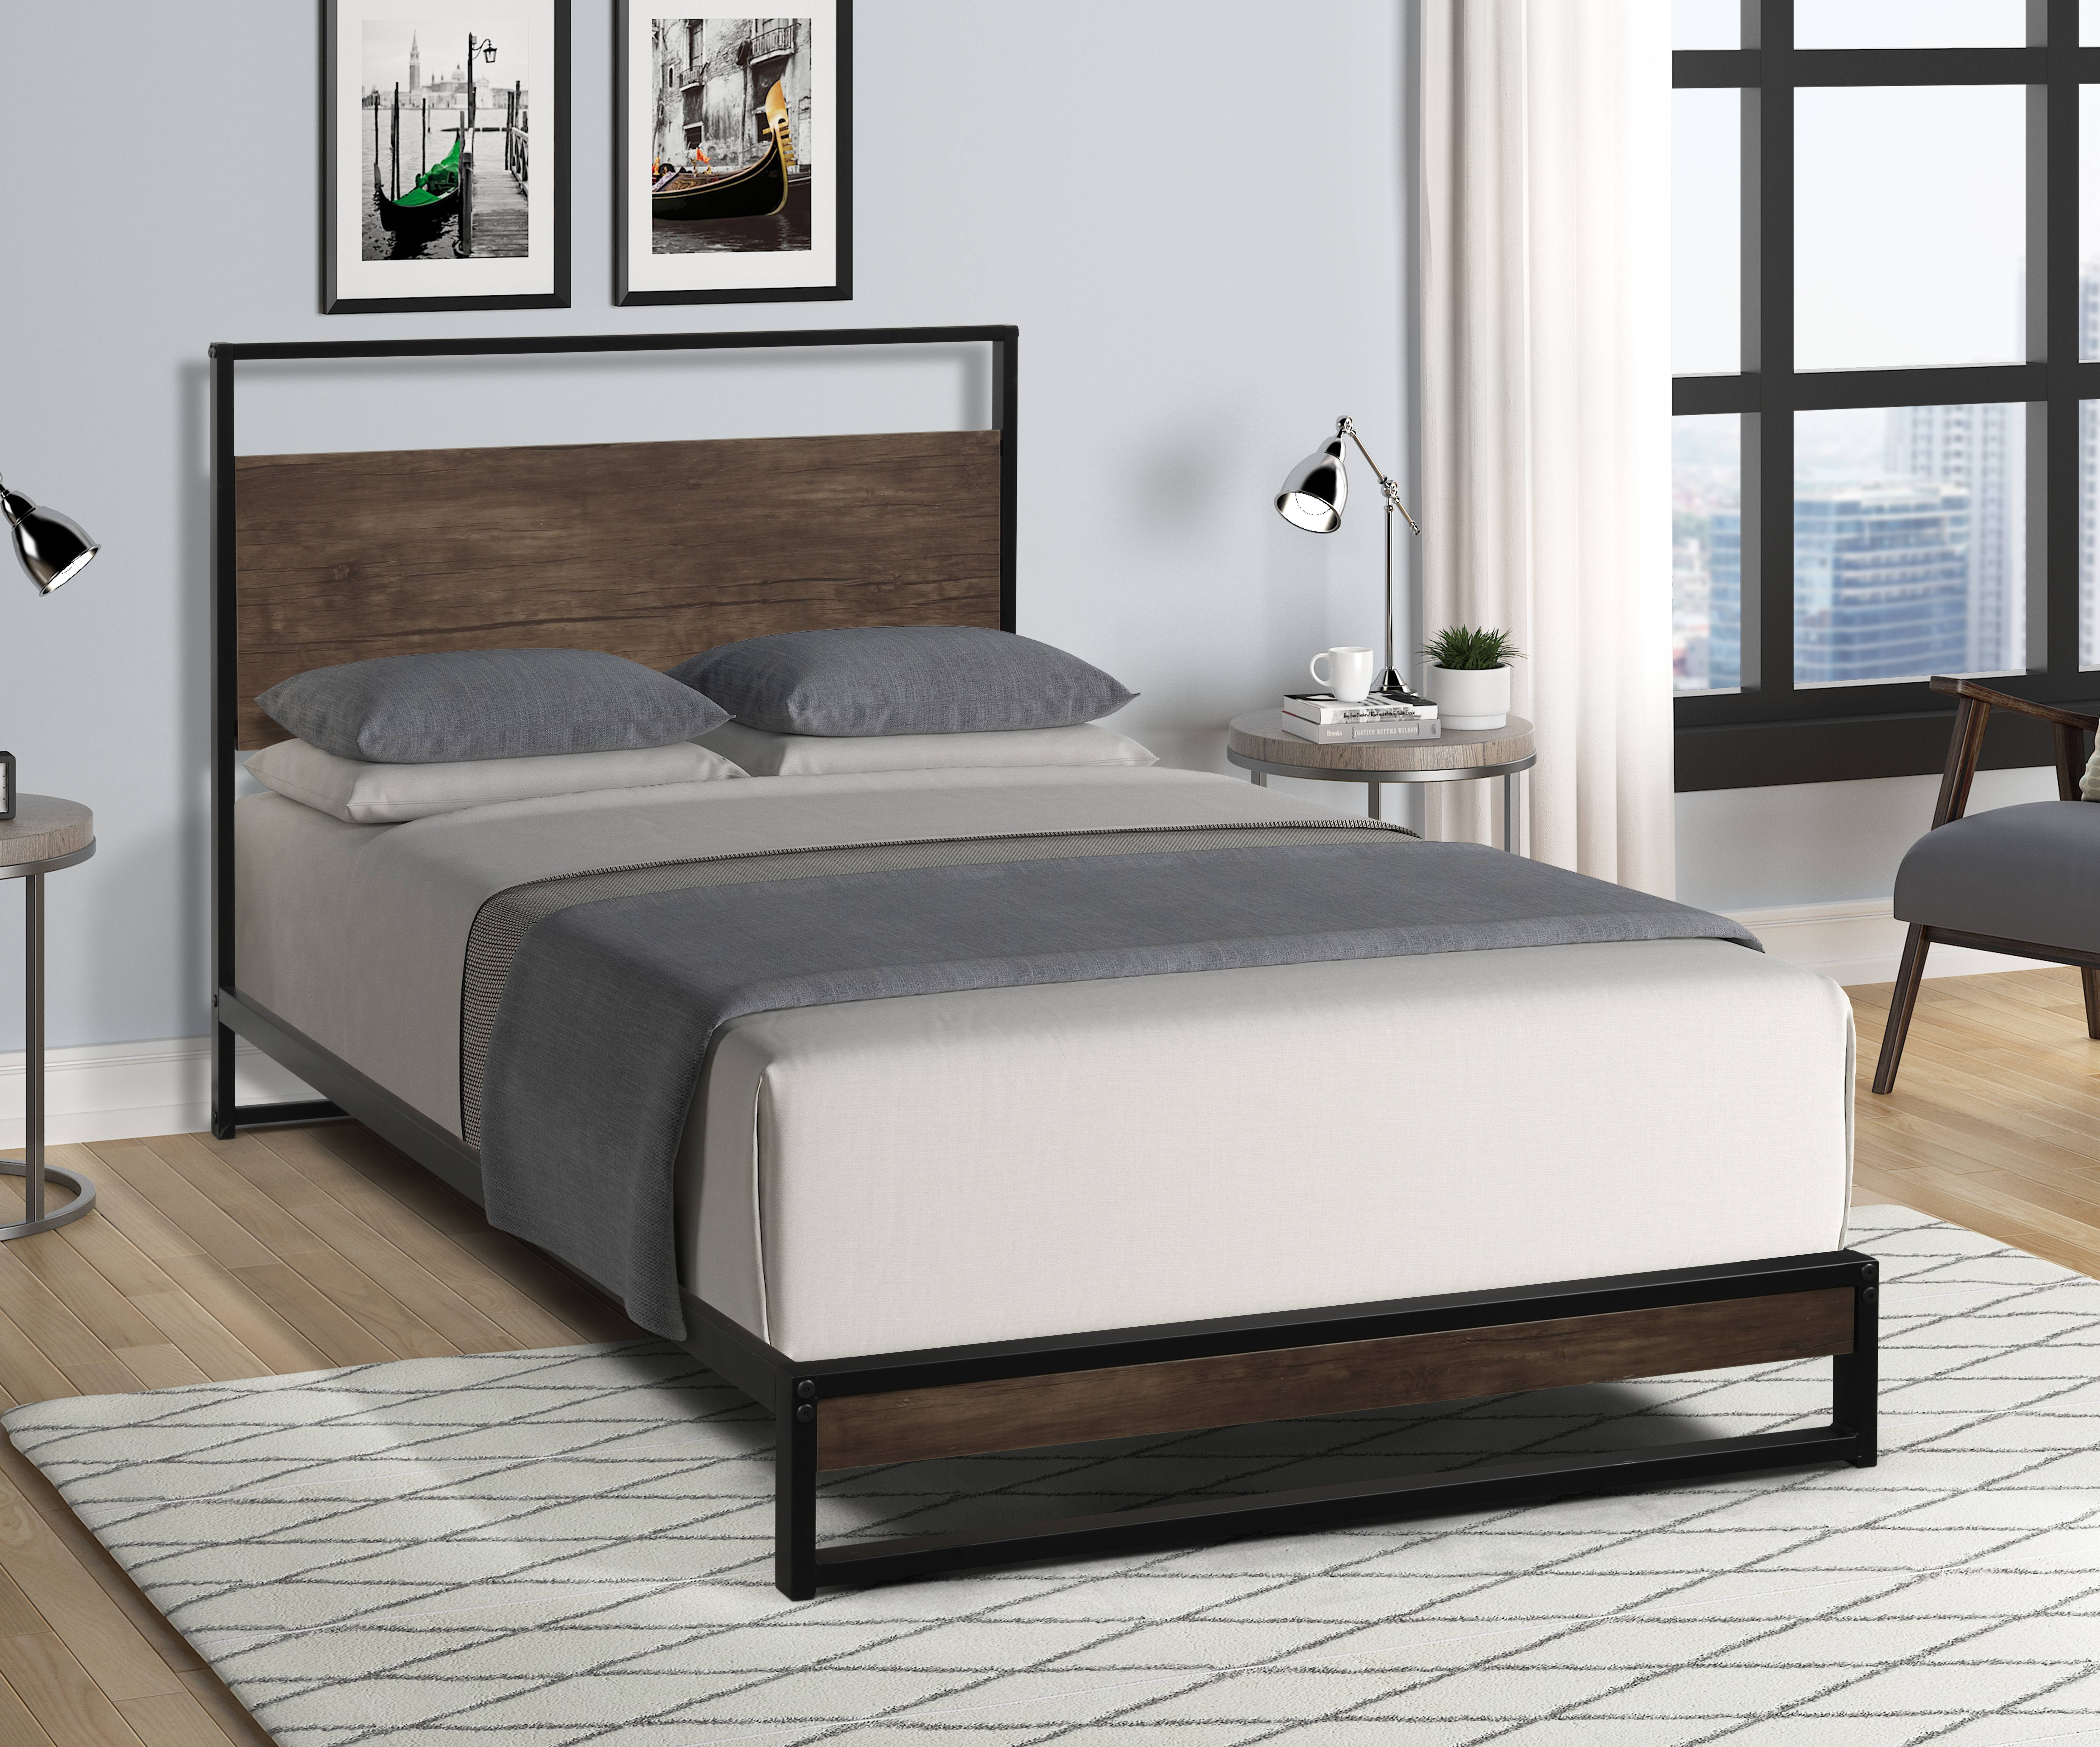 Bedframe Bedroom Furniture, Twin Bed Frame Without Box Spring